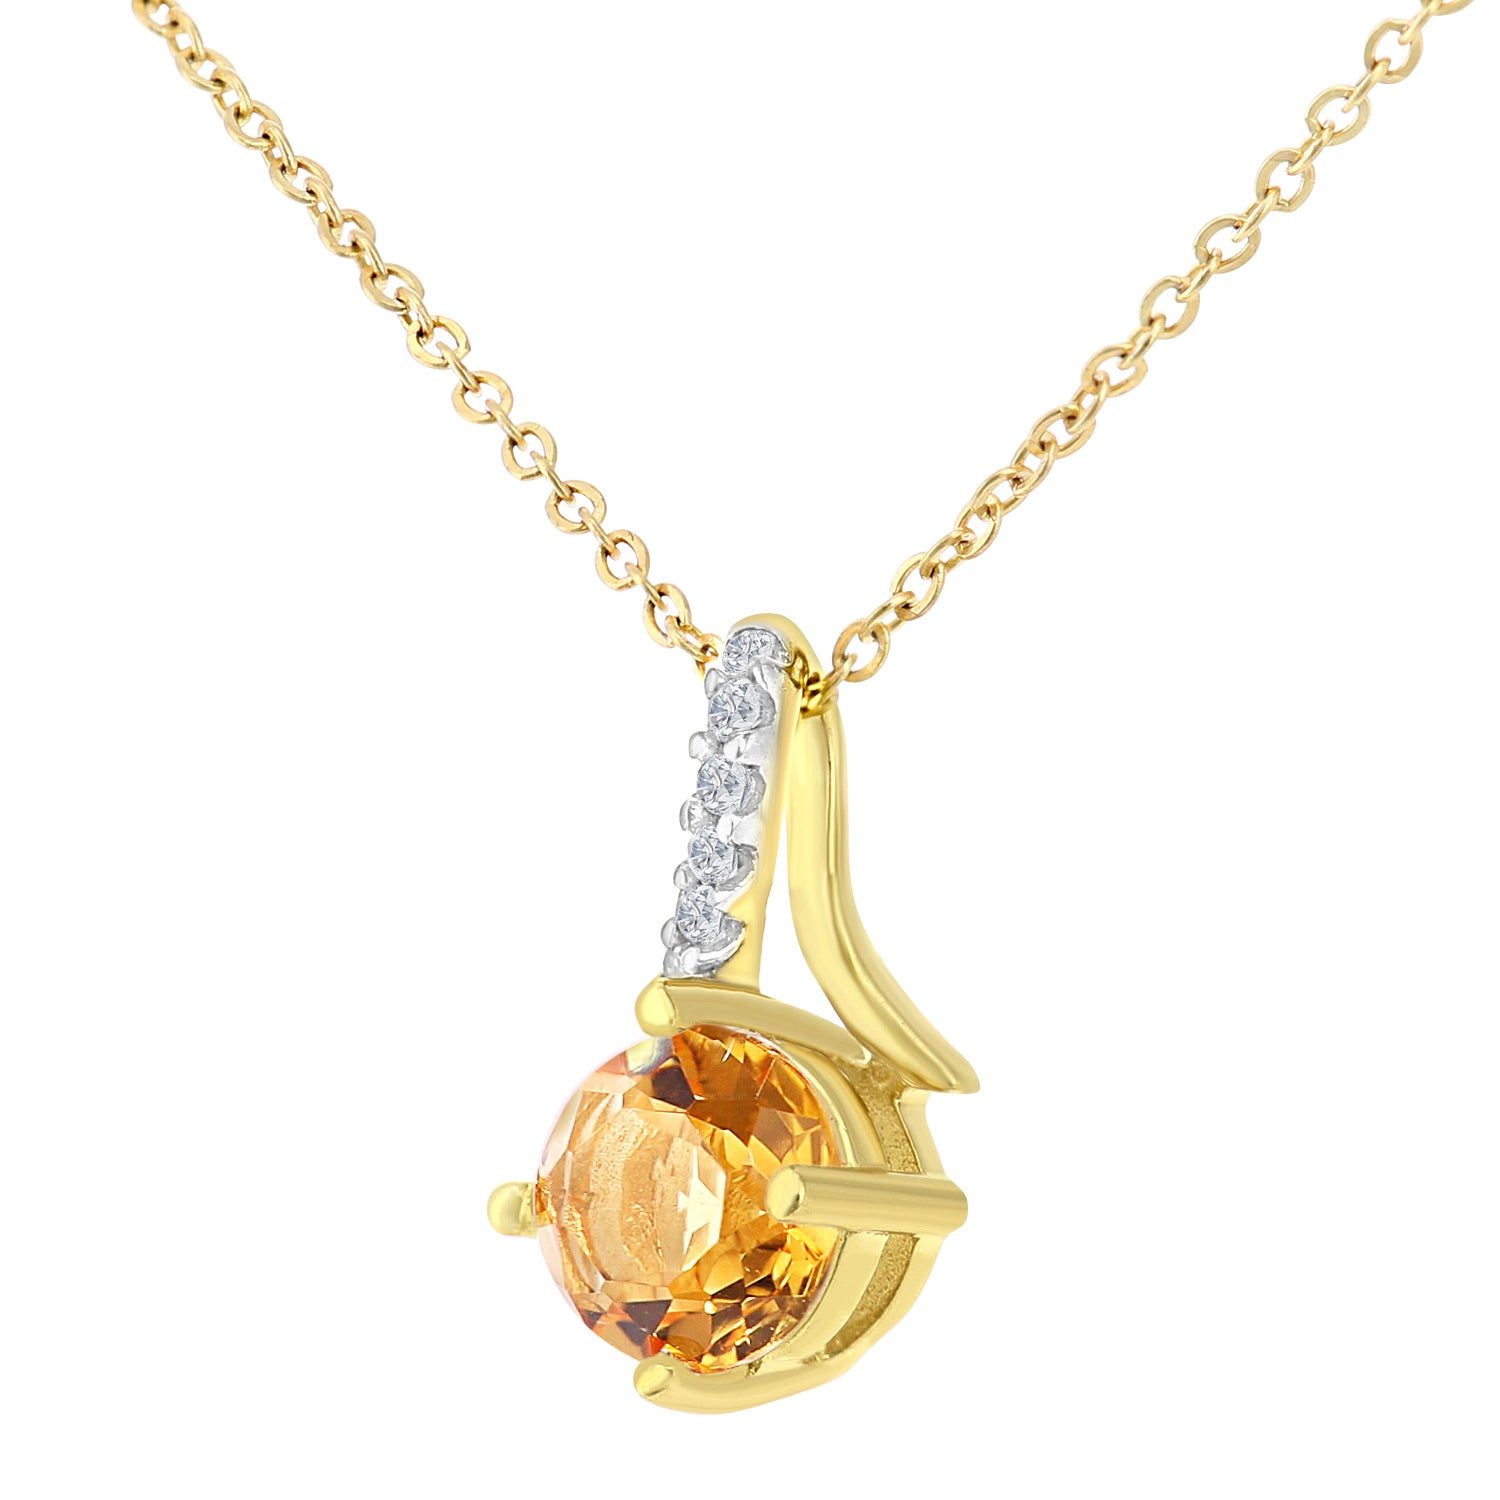 9ct Gold  2pts Diamond 0.39ct Citrine Kiss Crossover Necklace 18" - PP0AXL5929YCT